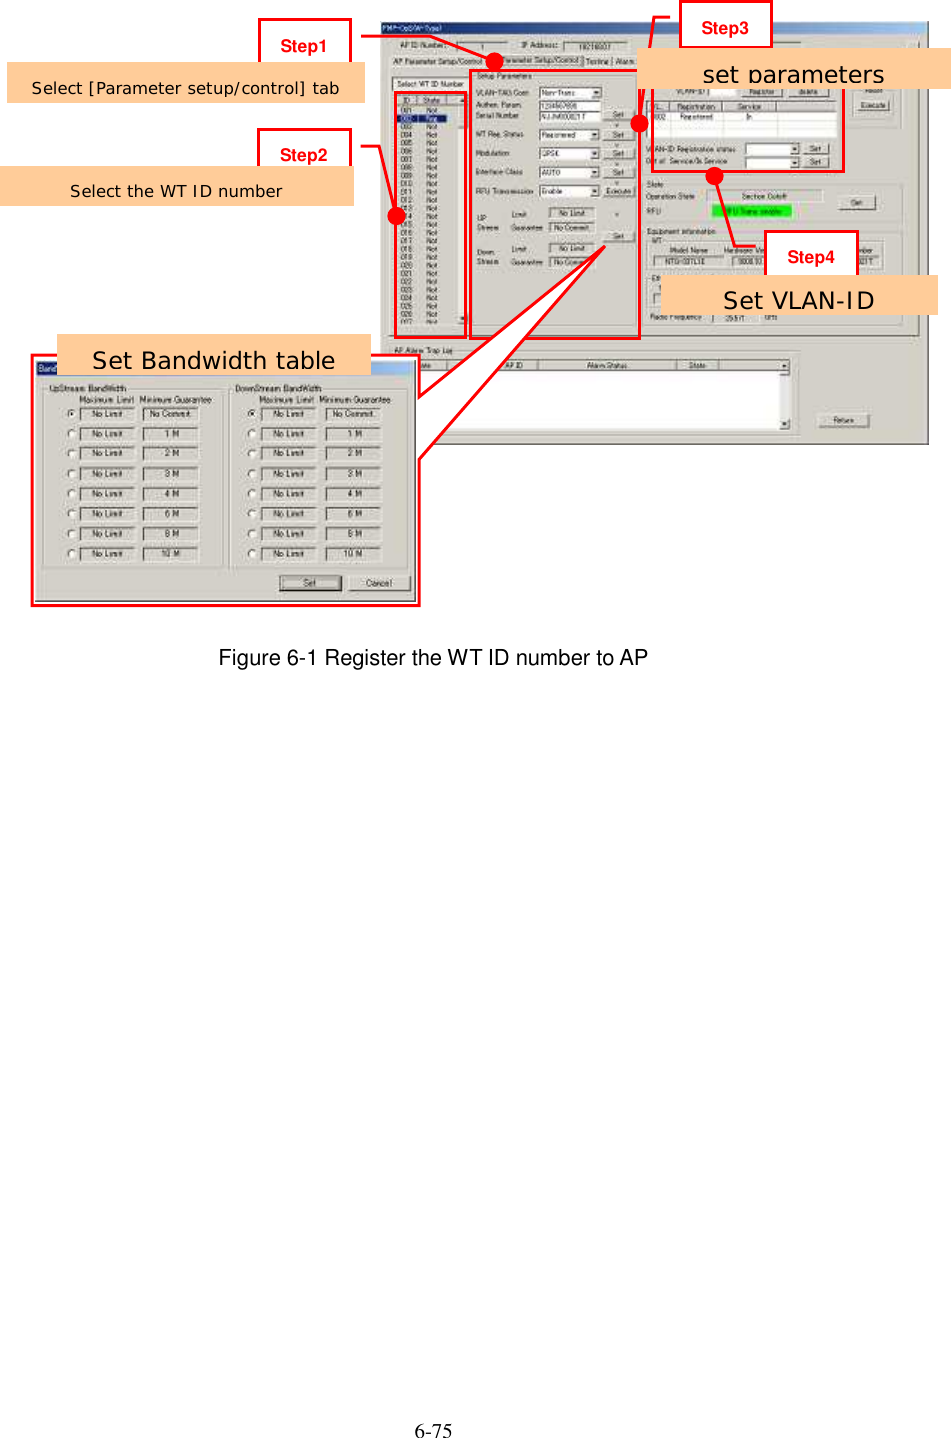   6-75     Figure 6-1 Register the WT ID number to AP    Step1 Step2 Step3 Step4  Set Bandwidth table Select [Parameter setup/control] tab Select the WT ID number set parameters Set VLAN-ID 